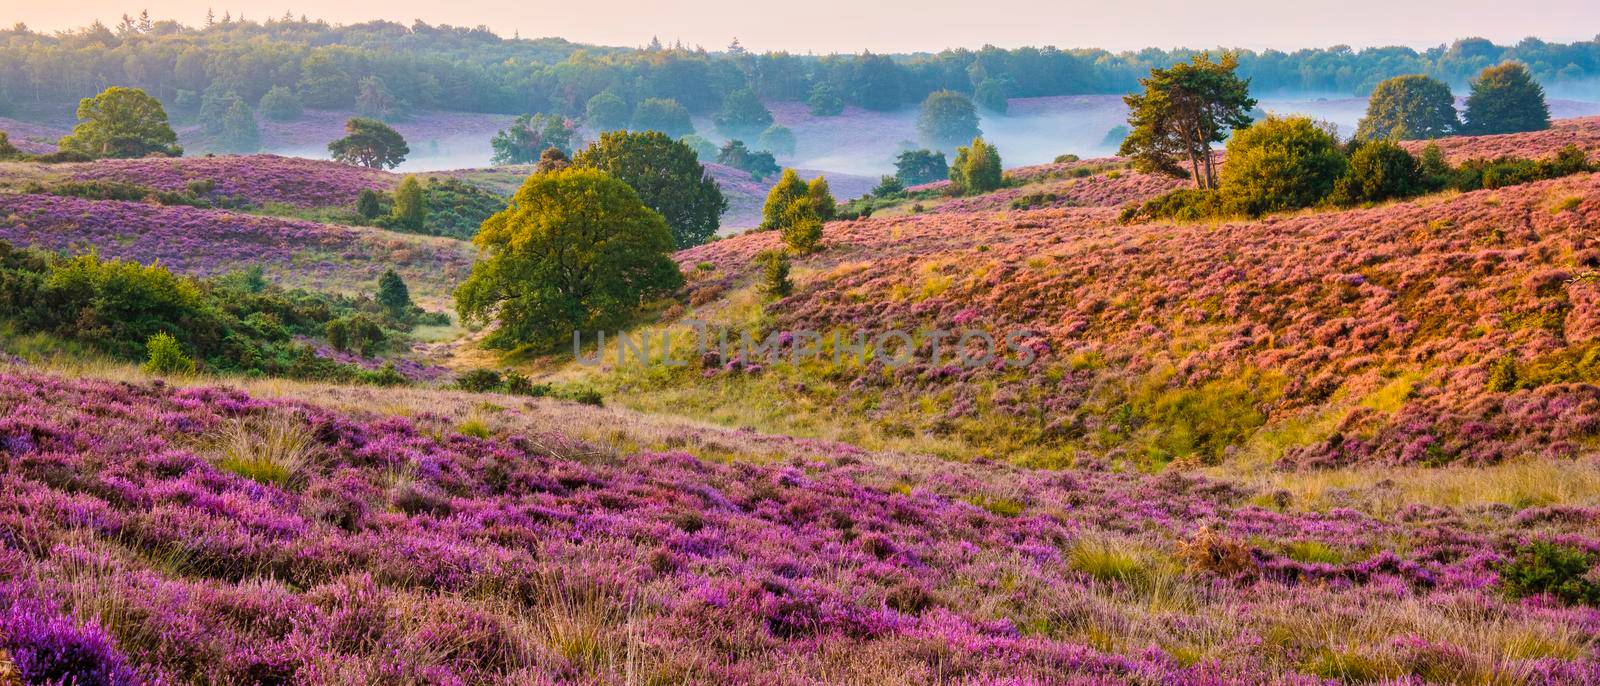 Posbank National park Veluwe, purple pink heather in bloom, blooming heater on the Veluwe by the Hills of the Posbank Rheden, Netherlands.